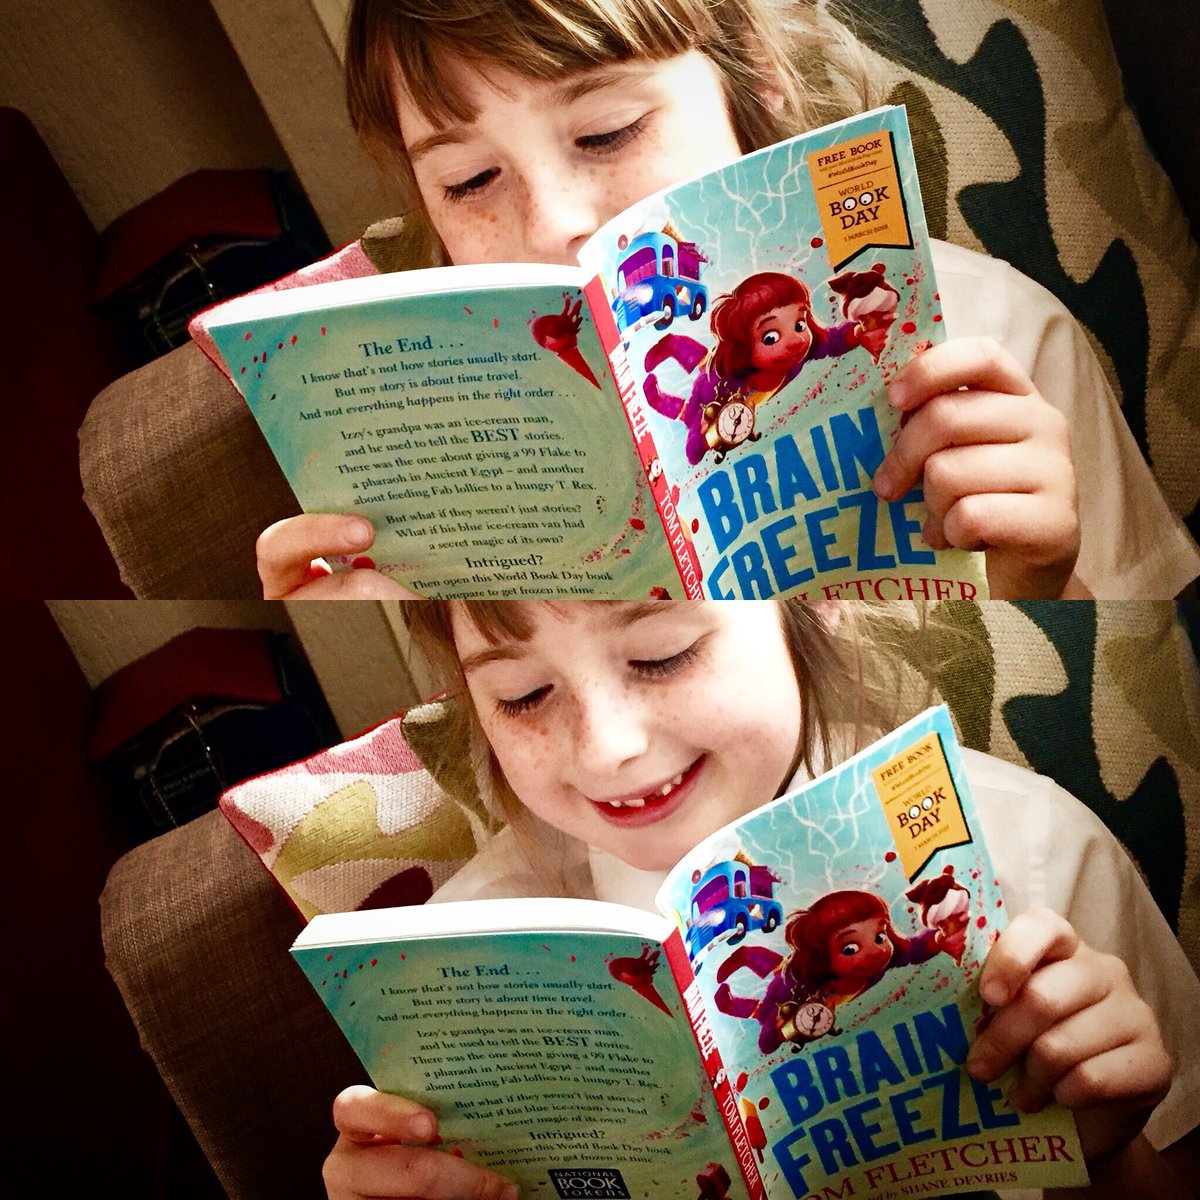 She knows it’s not #worldbookday yet, but she just doesn’t care! #worldbookday2018 #brainfreeze #tomfletcher #amreading #mustread #brainfreezetomfletcher #daughter #family #youngreader #youngreaders #bookworm